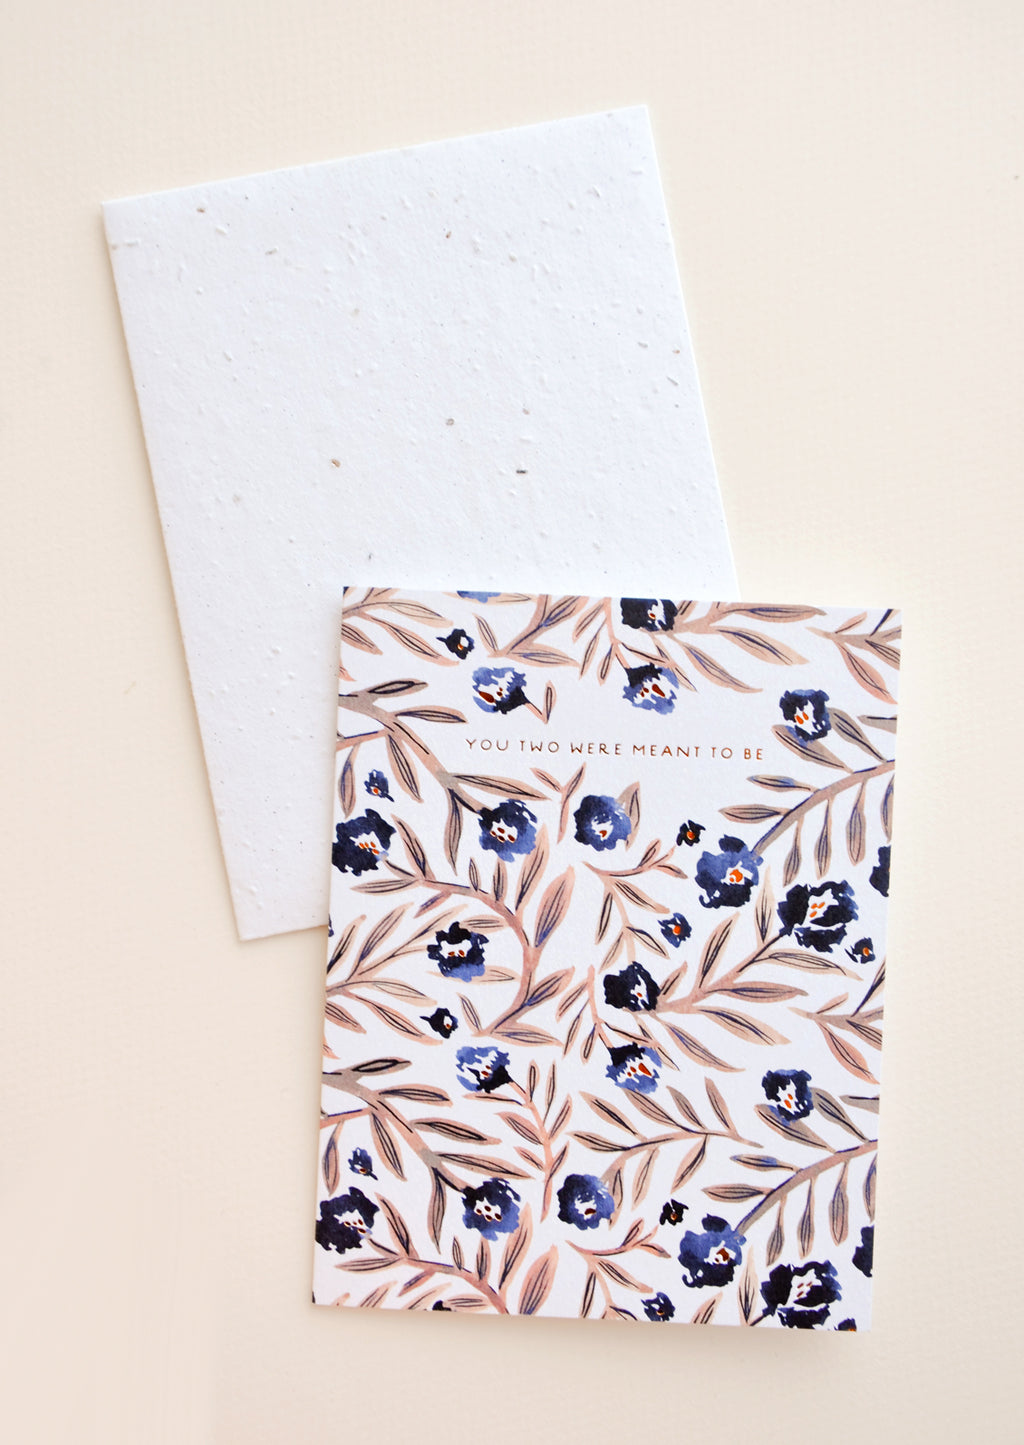 1: Notecards with blue flowers and brown stems and the text "You Two Were Meant To Be", with white envelope.